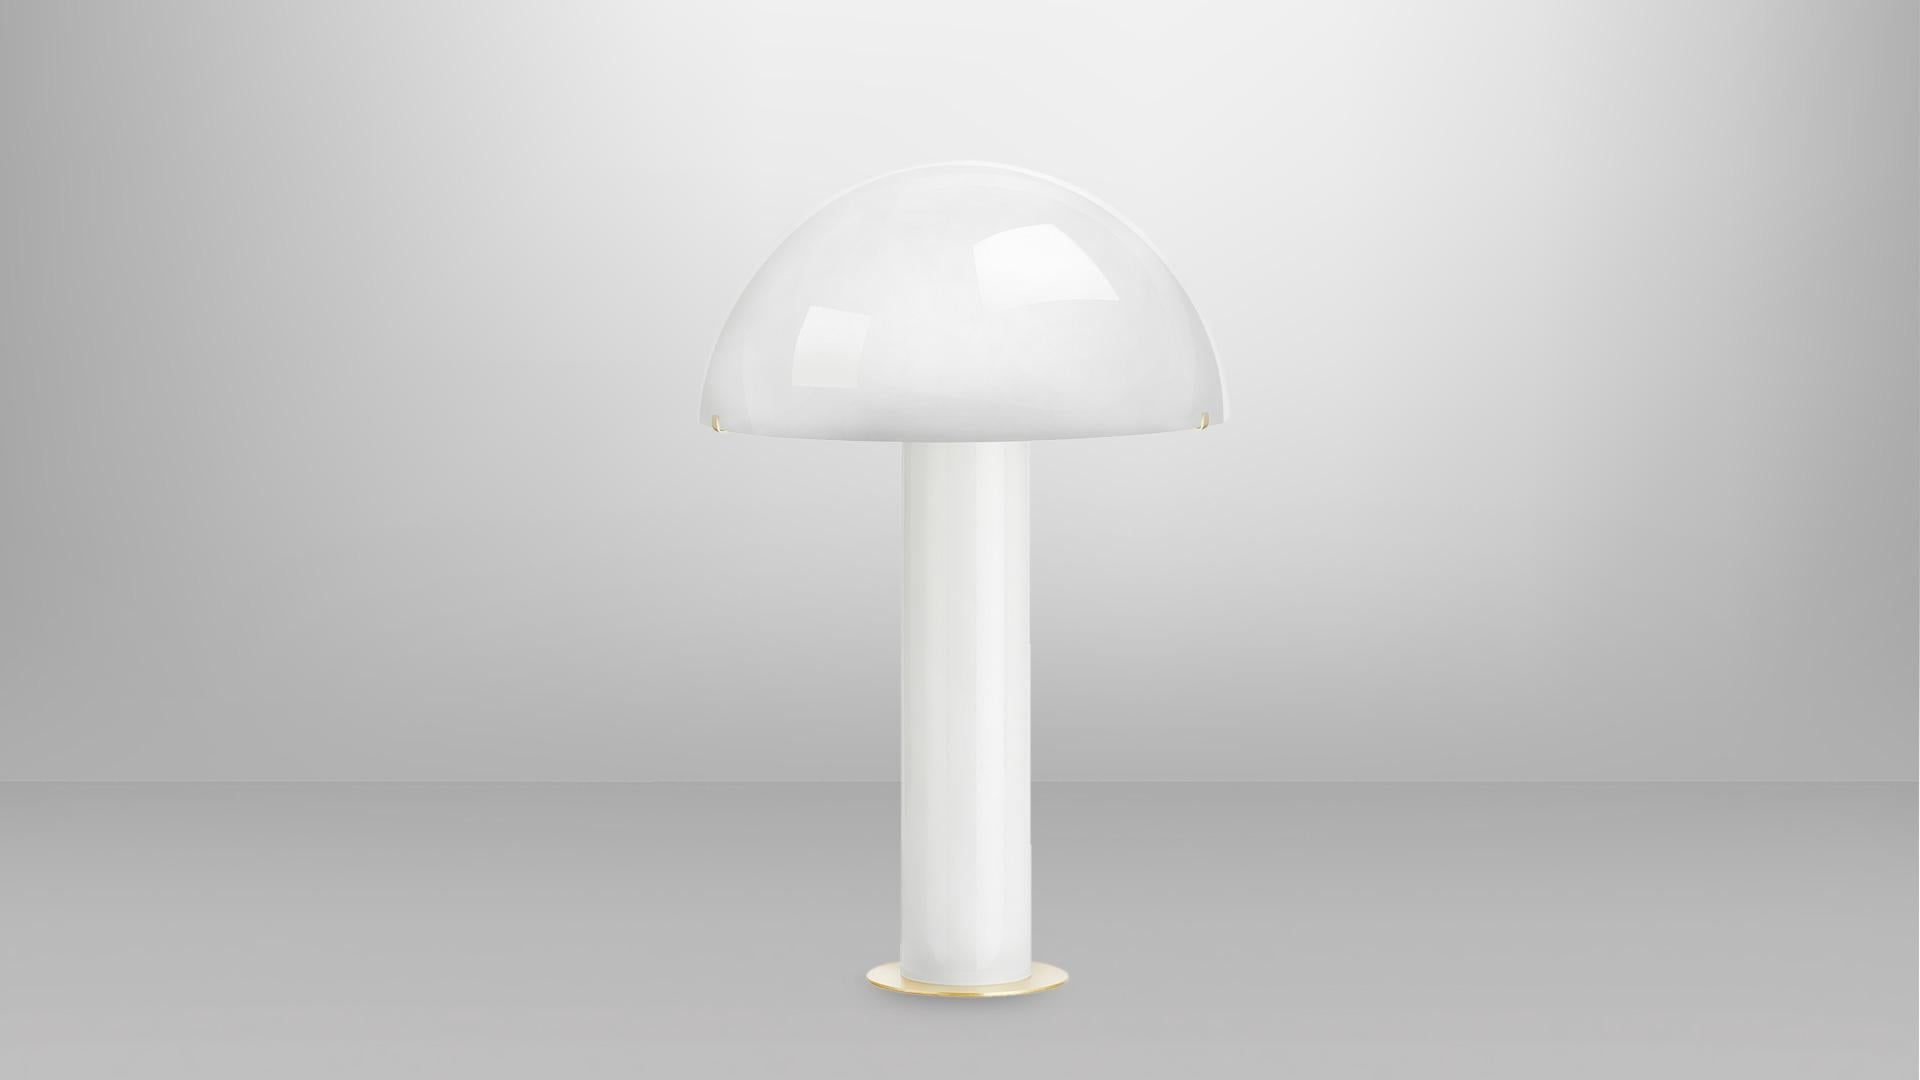 Hanover table lamp by CTO Lighting
Materials: opal white glass, satin brass
Dimensions: 38.5 x H 60 cm

All our lamps can be wired according to each country. If sold to the USA it will be wired for the USA for instance.

2 x E12, 60w max (or